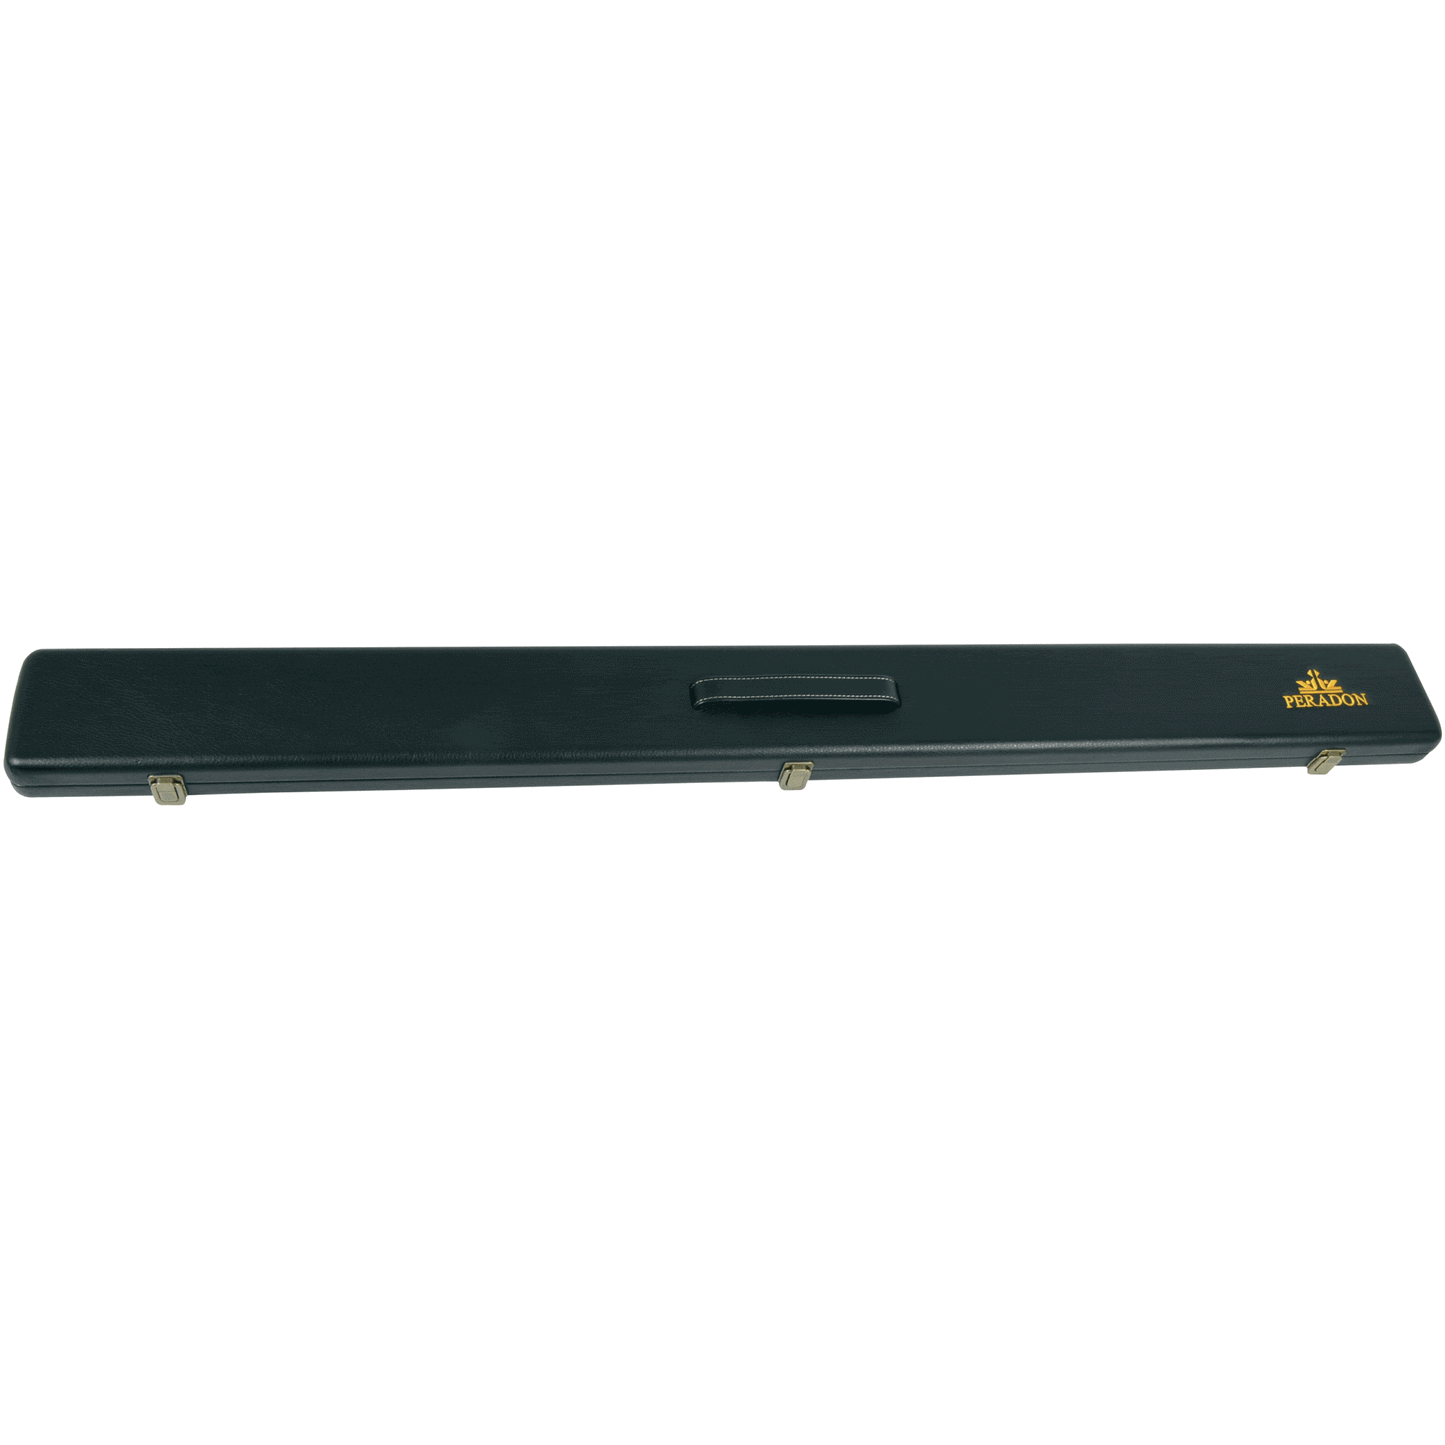 Peradon Leather Look Black Cue Case for ¾ Jointed Cues